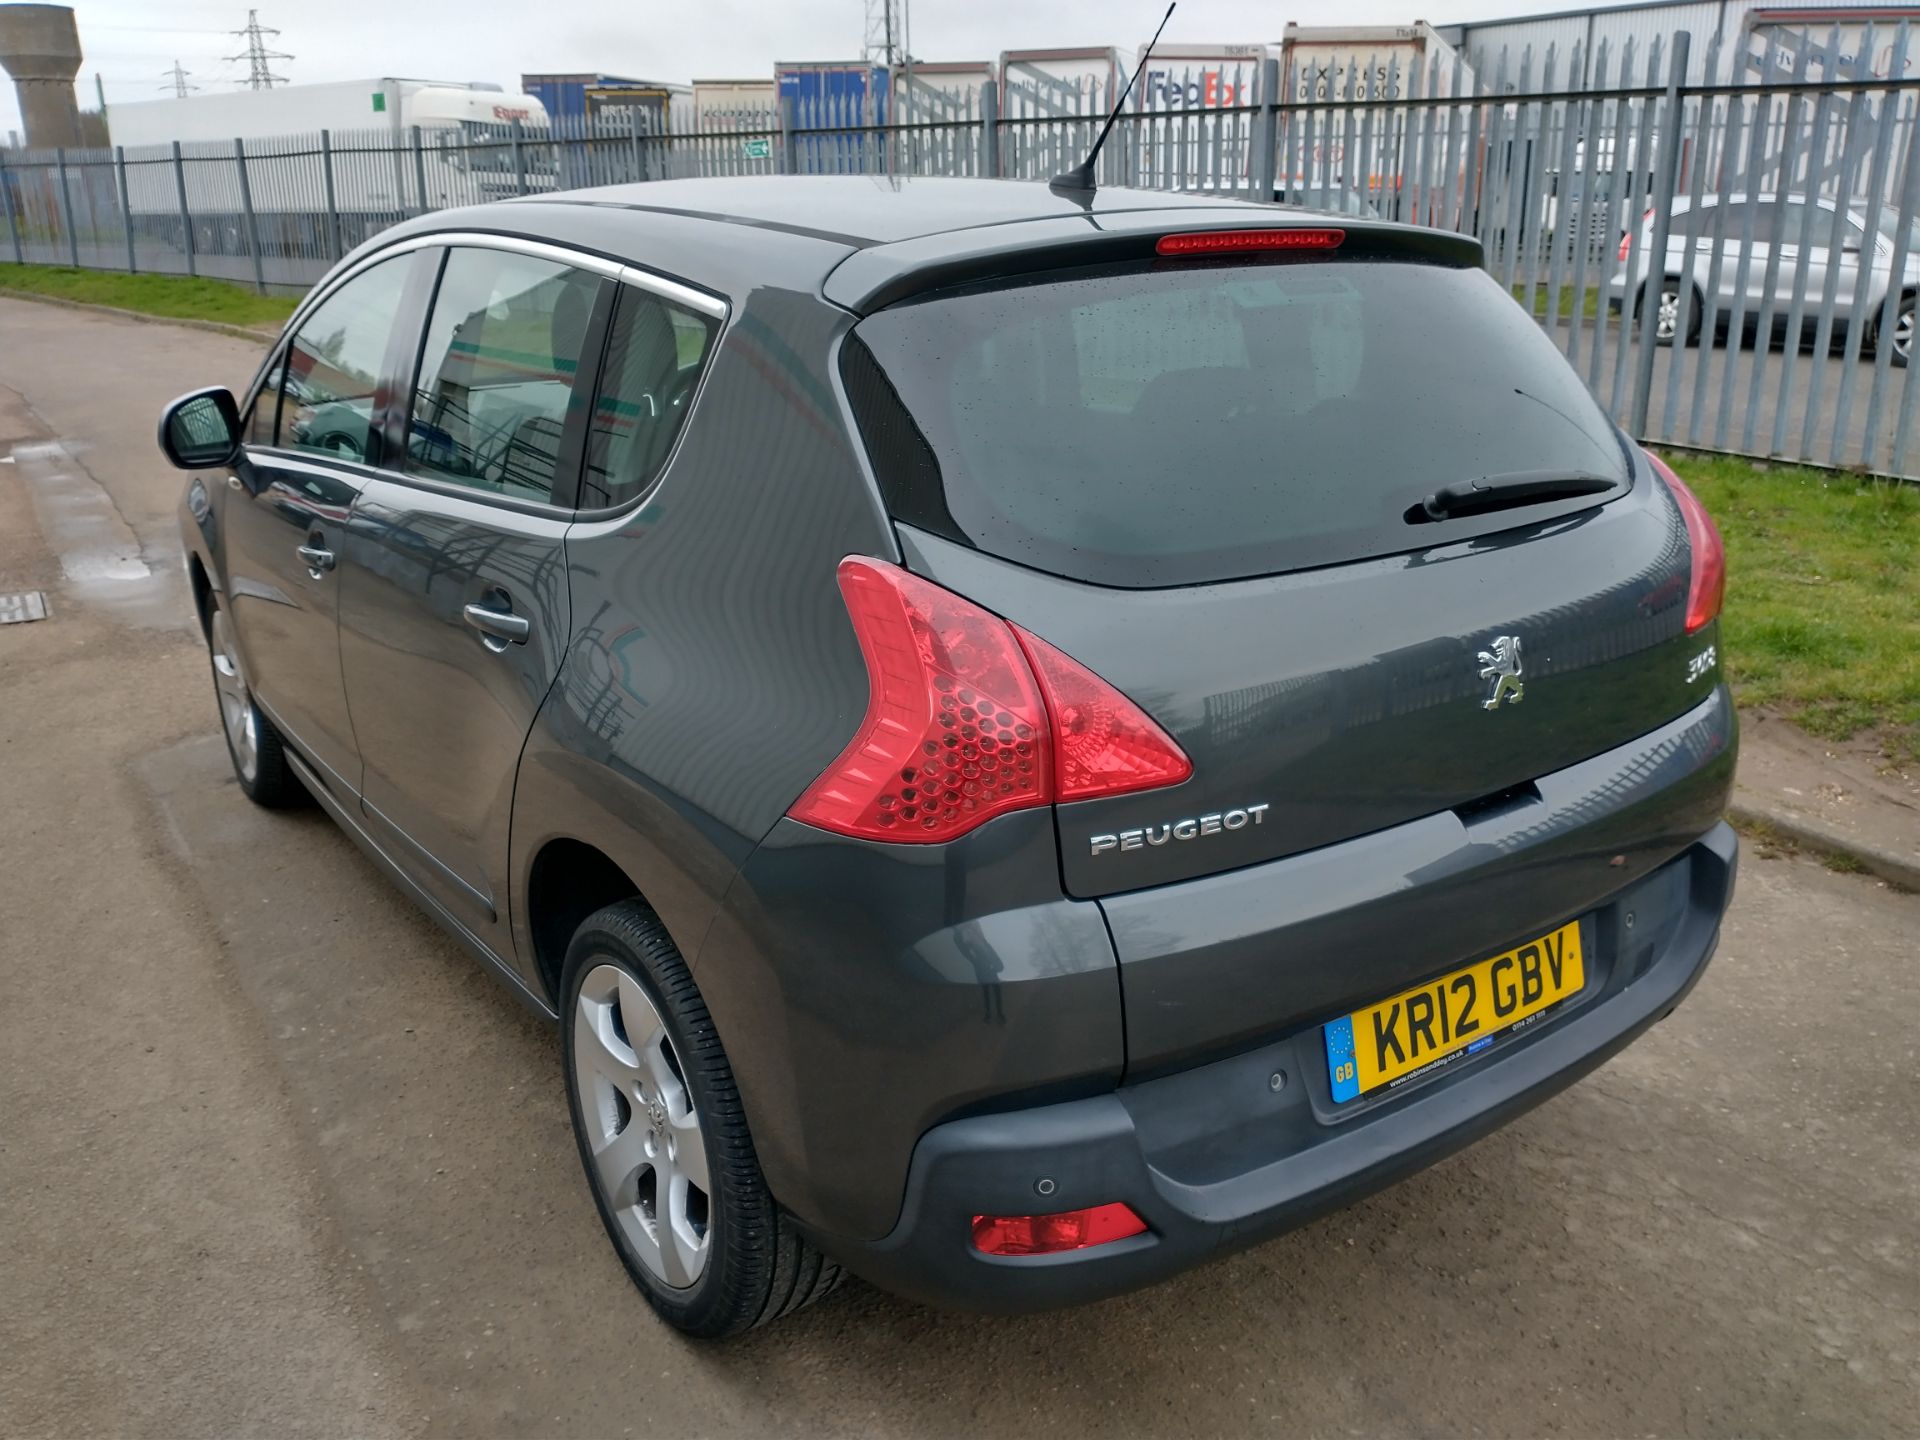 2012 Peugeot 3008 Active HDI 1.6 5DR SUV - CL505 - NO VAT ON THE HAMM - Image 6 of 19